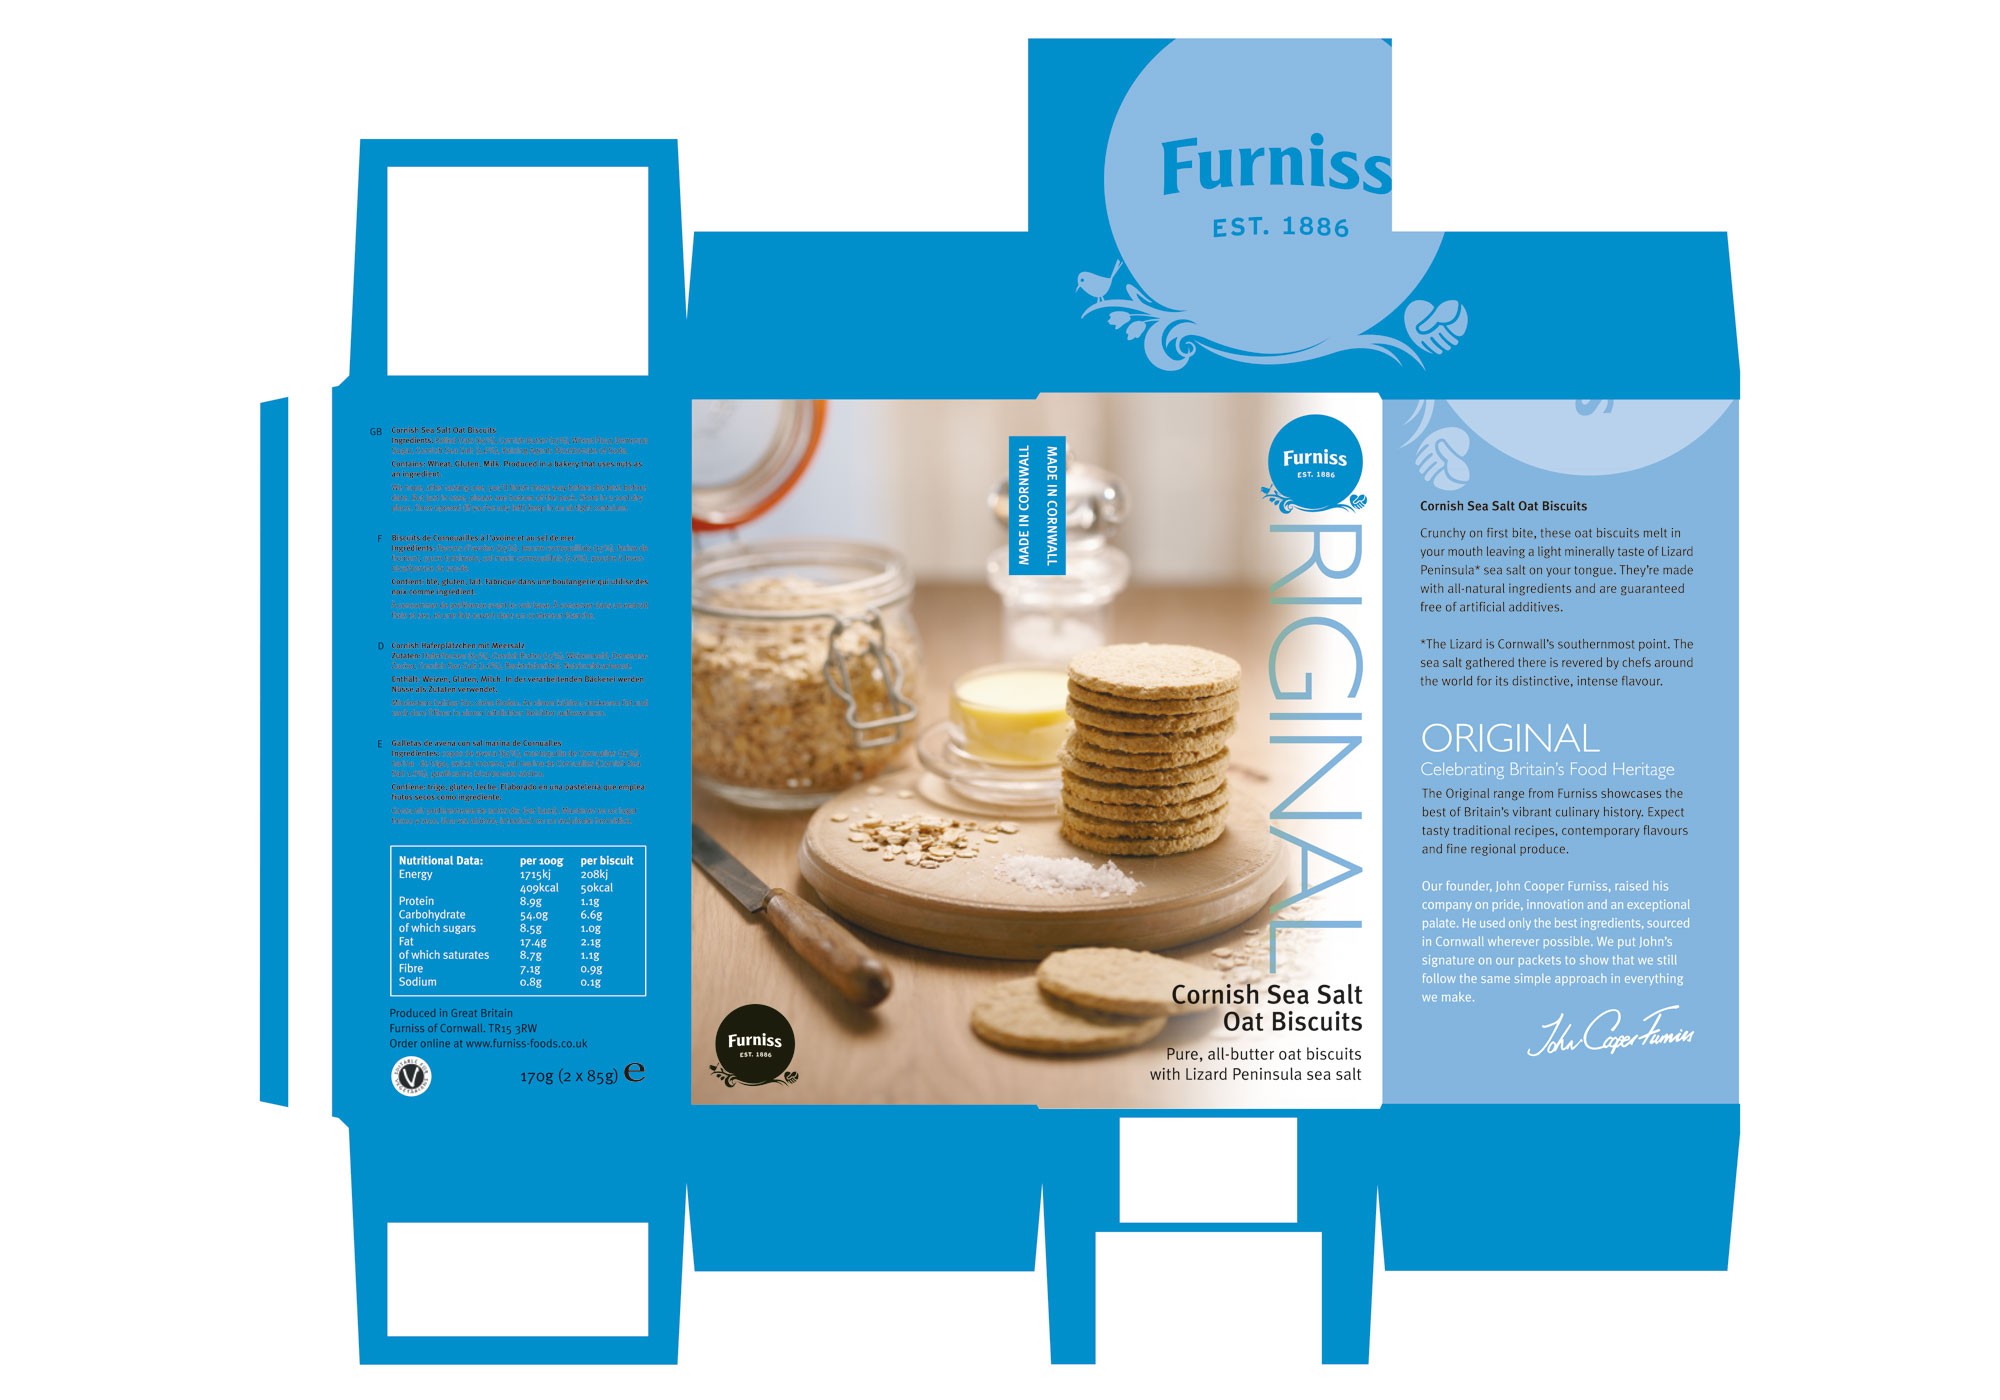 voice-group-web-client-work-2017-S1-furniss-packaging-05.jpg